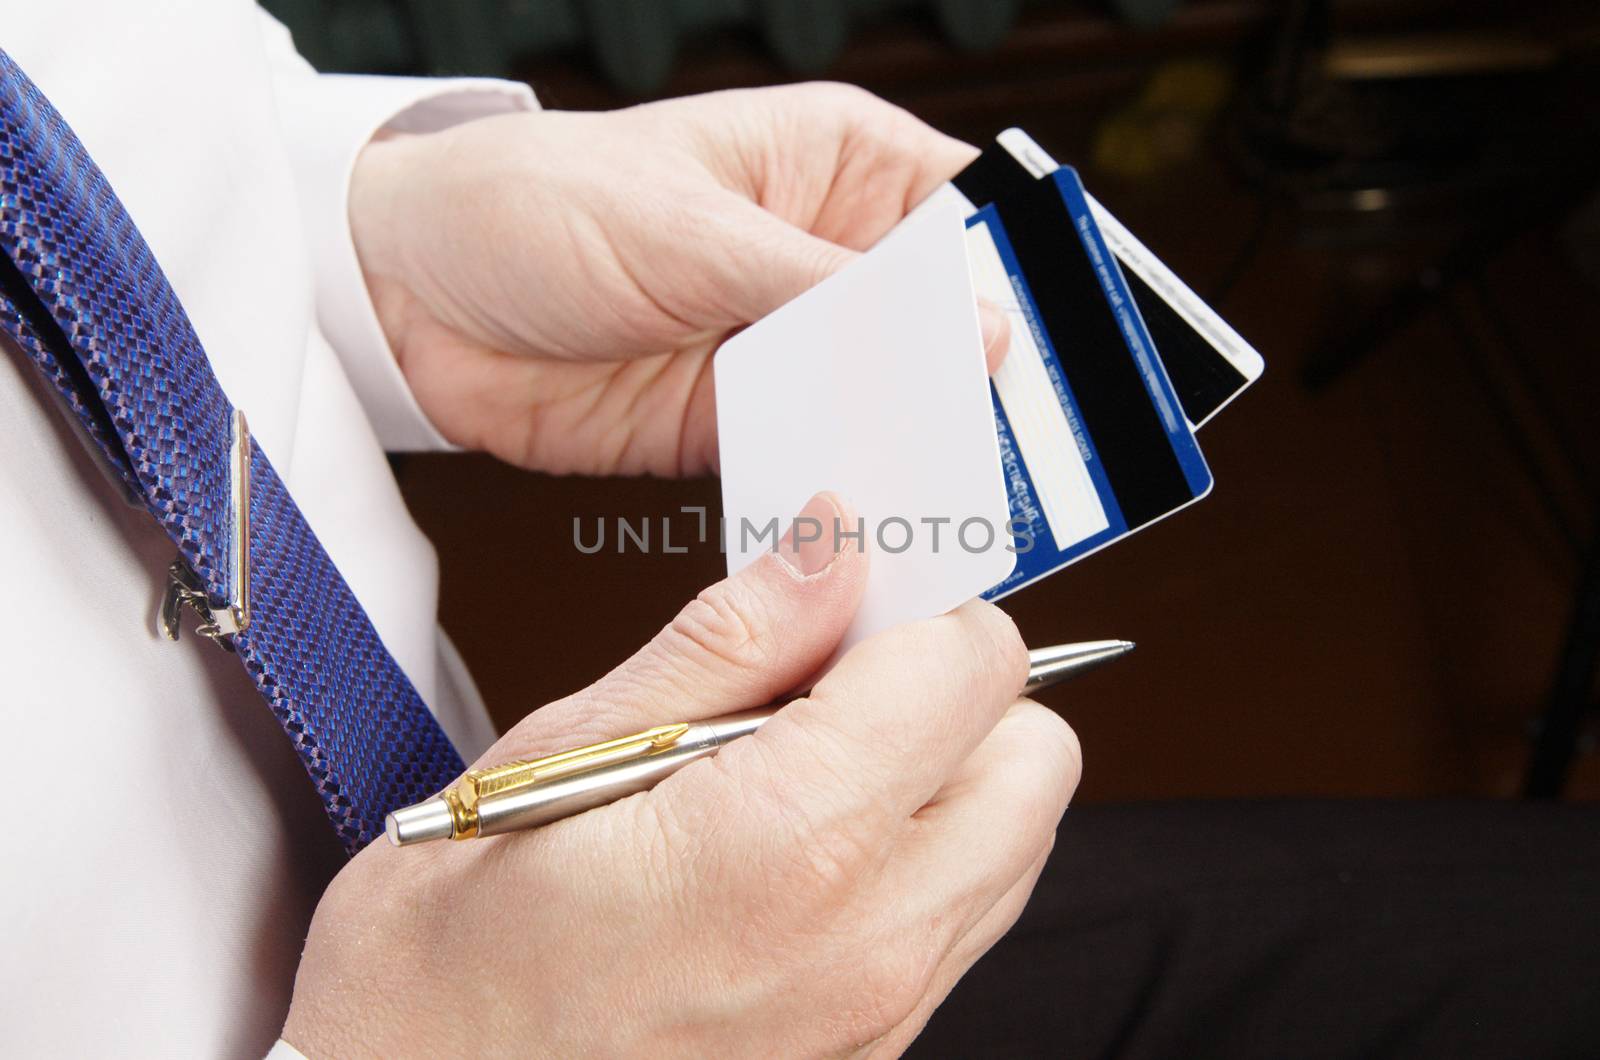 Businessman in white shirt holding credit cards and pen